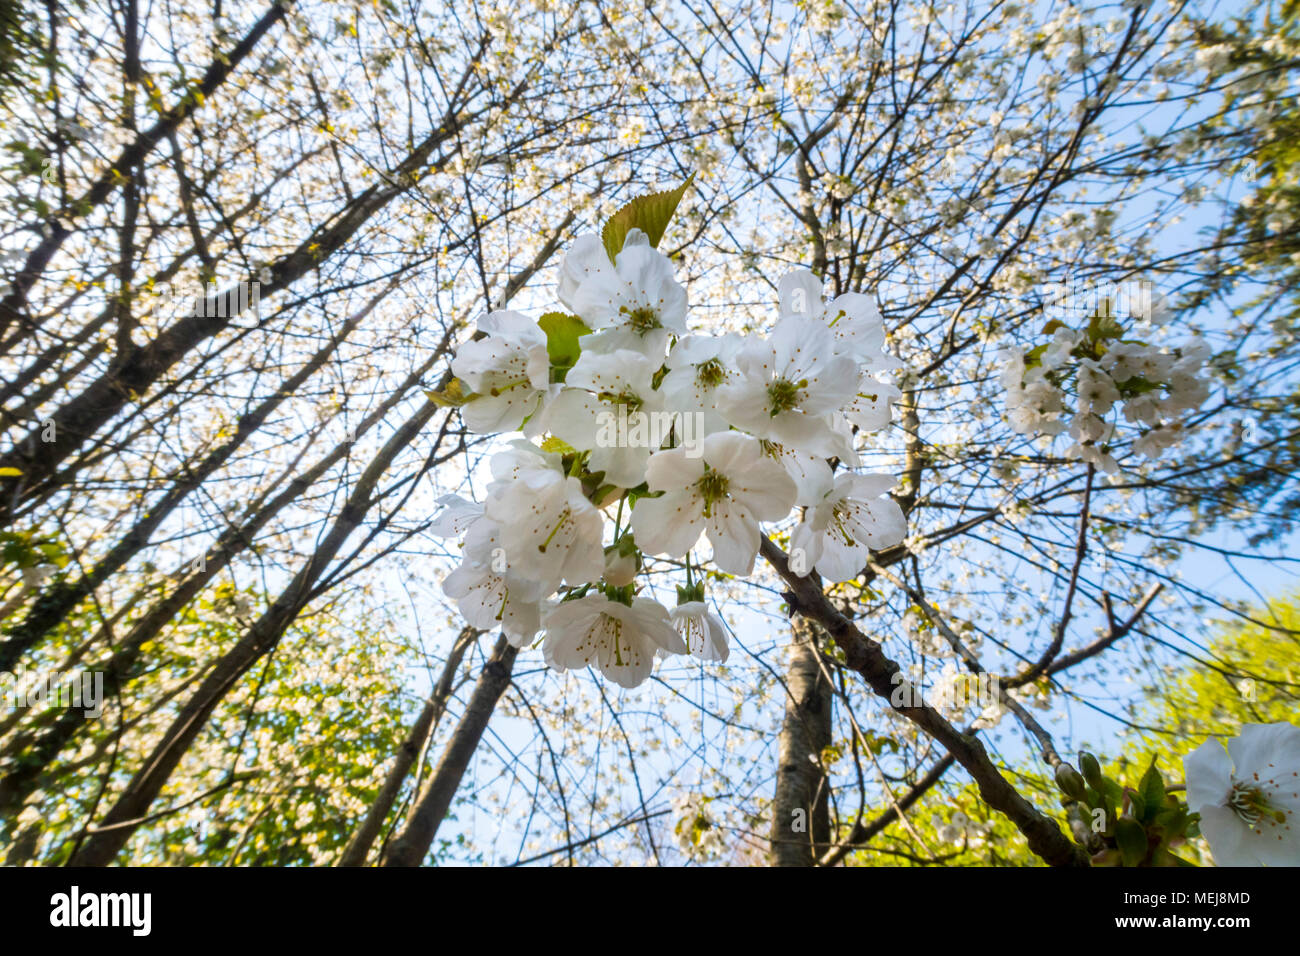 Cherry blossom hangs in a canopy from a thicket of wild cherry trees, prunus avium. Stock Photo